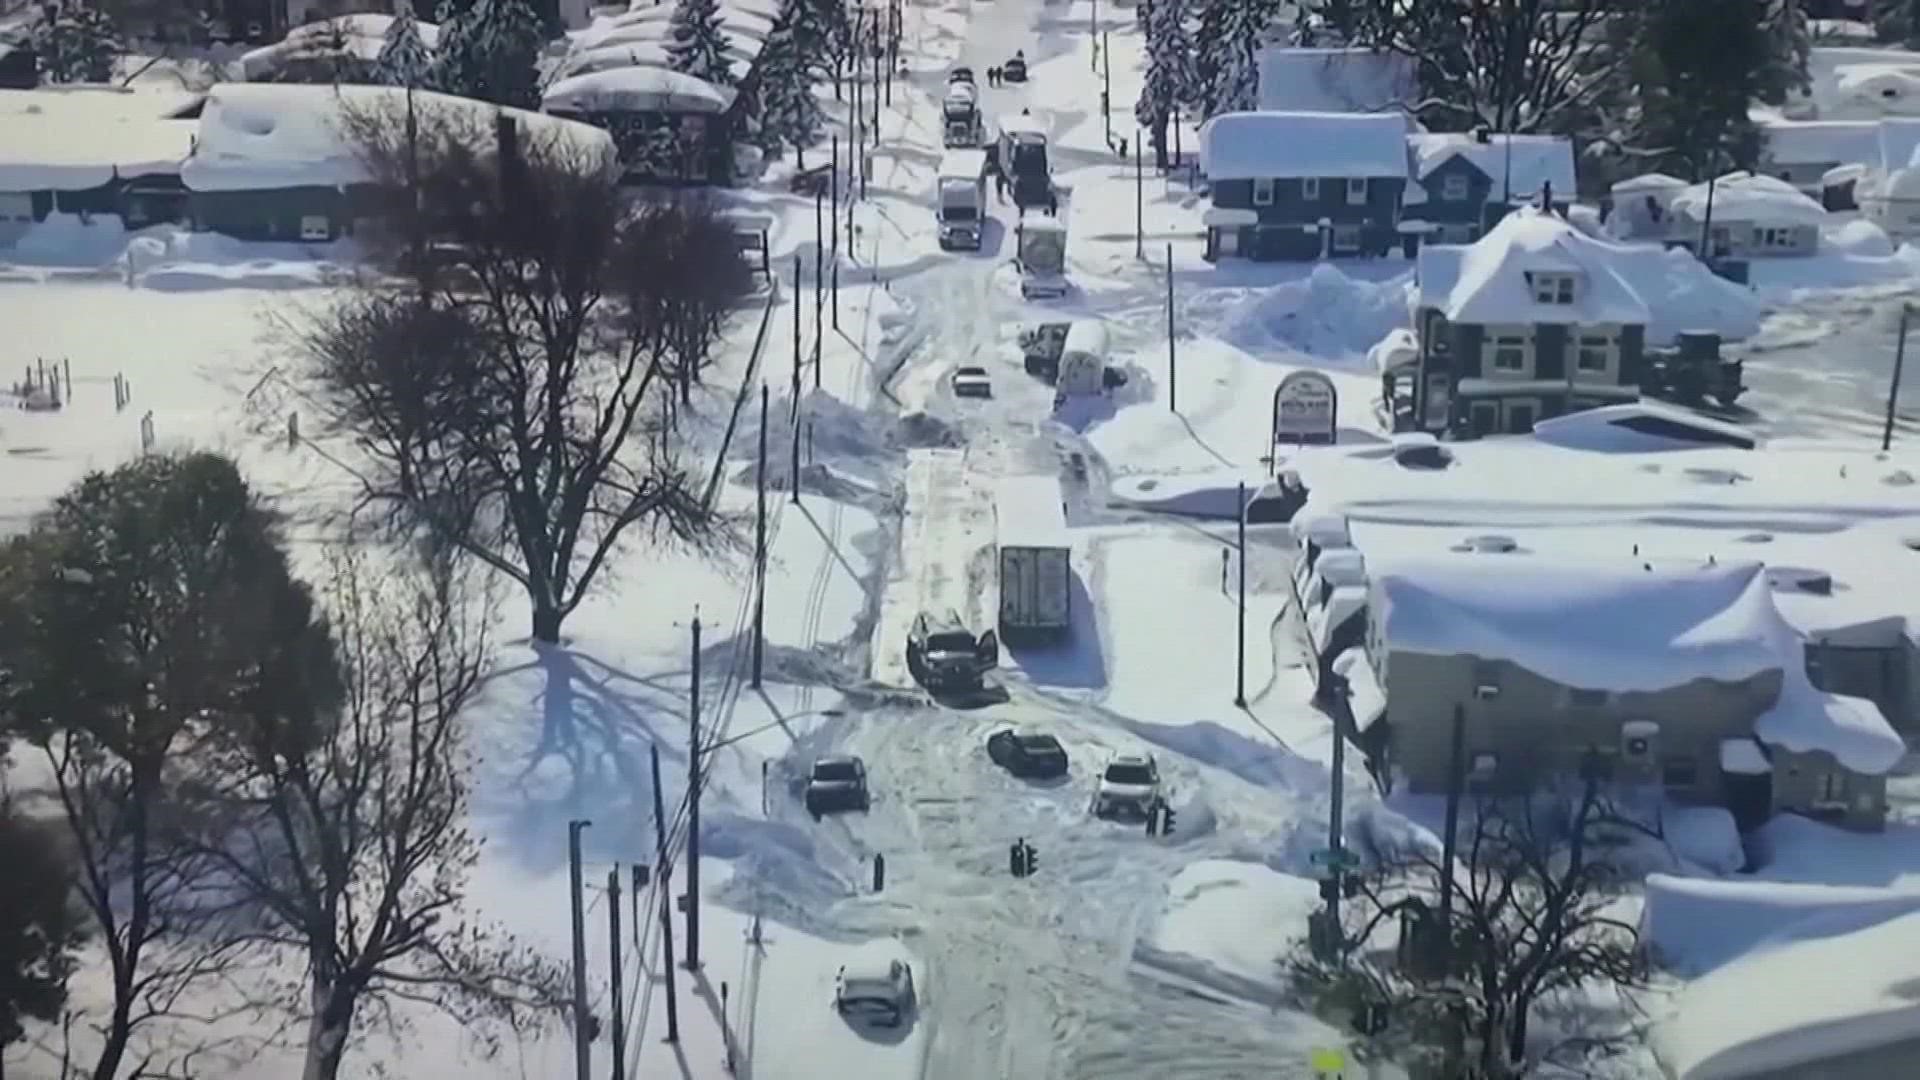 Already, more than 30 deaths have been reported in western New York from the blizzard that raged Friday and Saturday across much of the country.